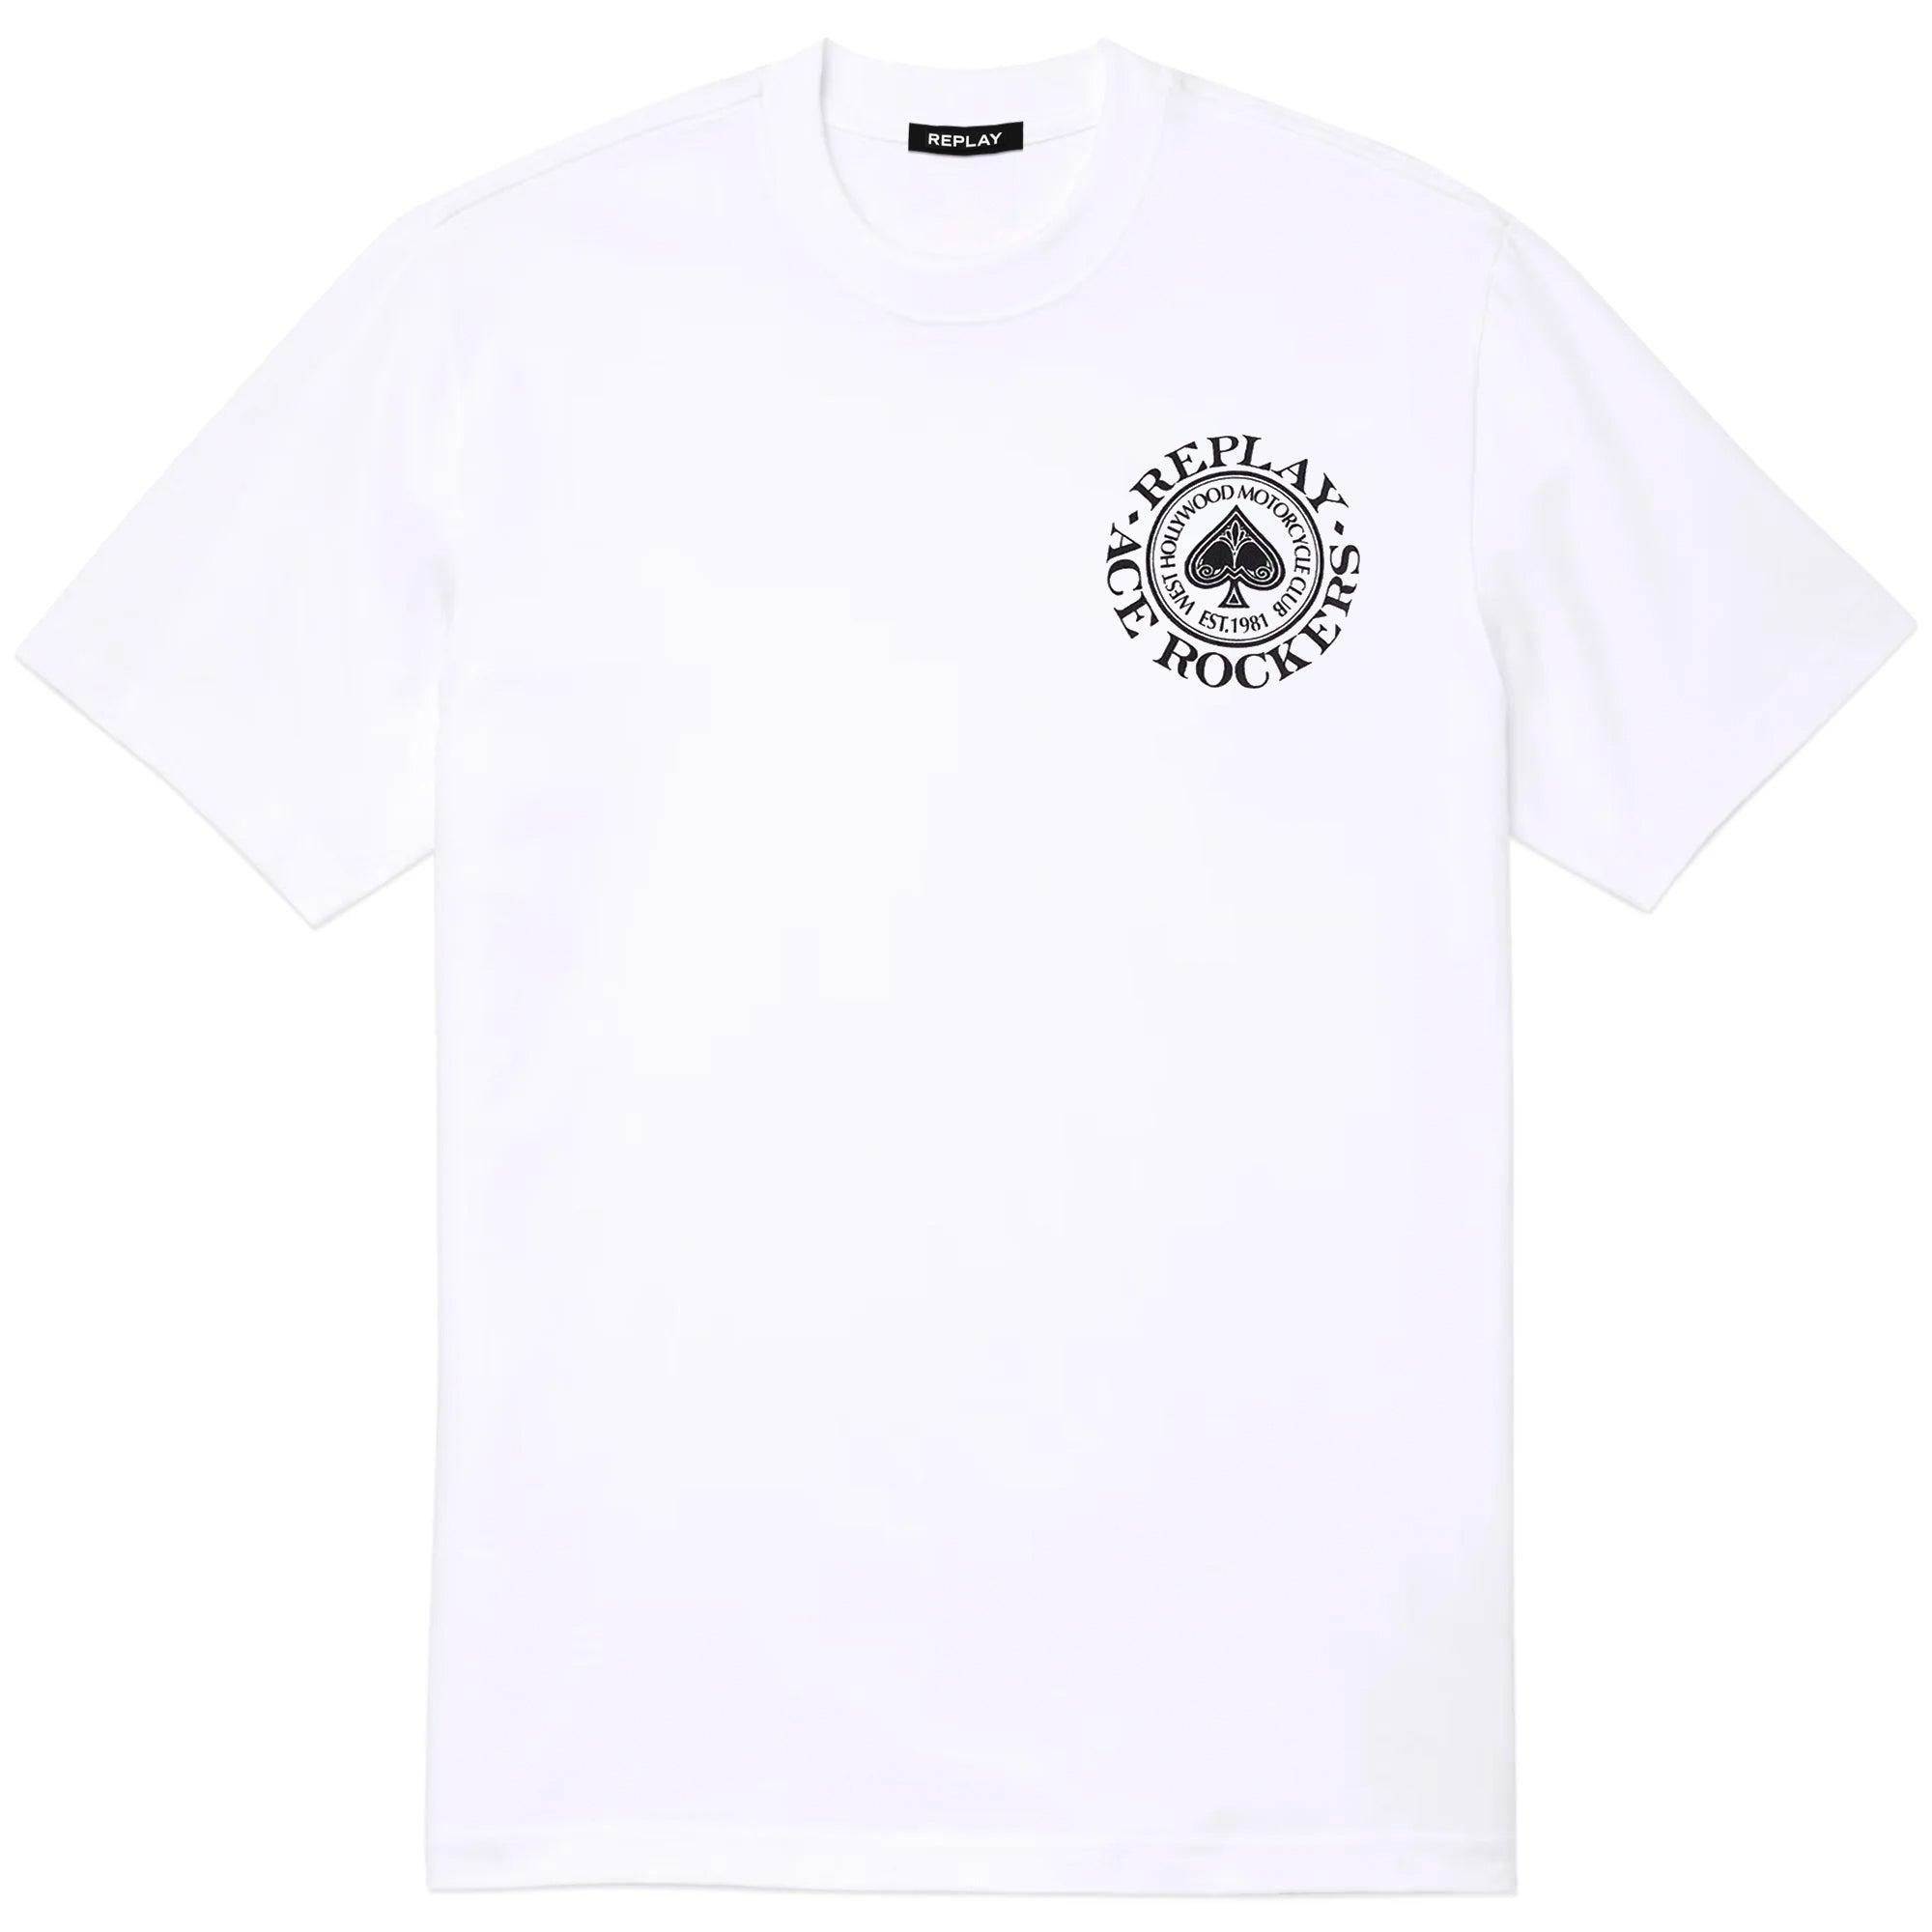 Replay Ace Of Spades Rockers T-shirt in White for Men | Lyst